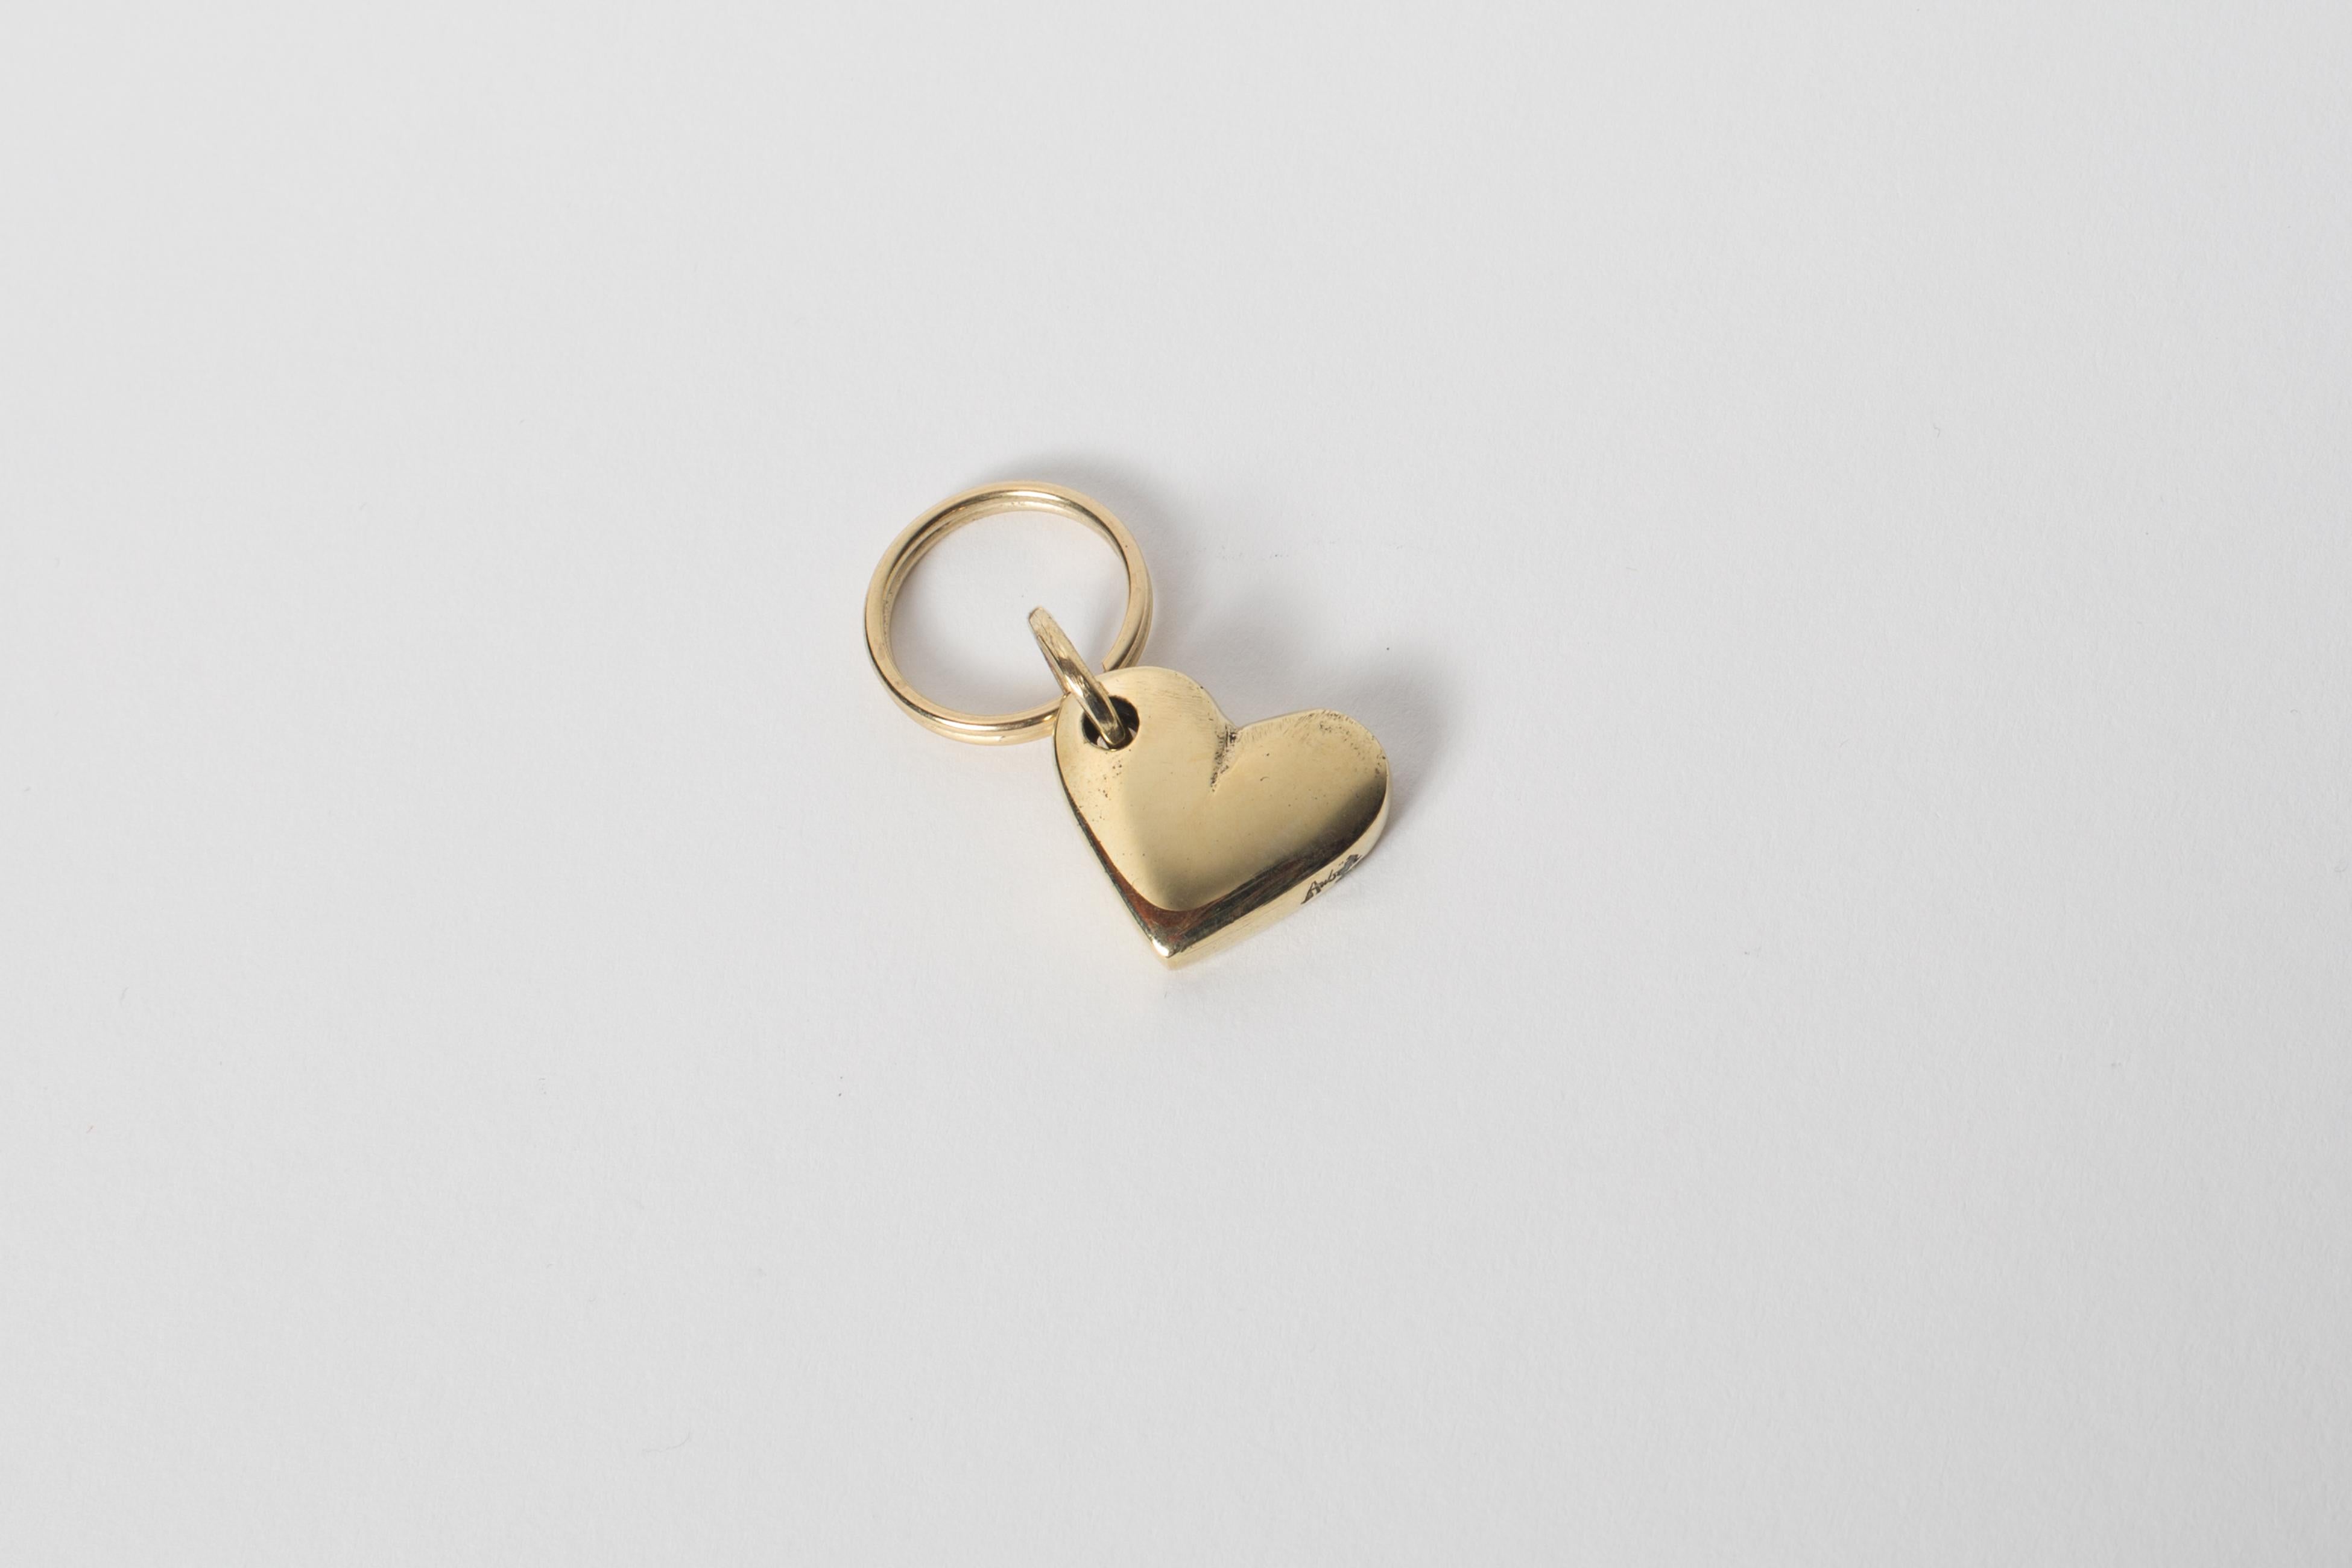 Carl Aubo¨ck Model #5600 'Heart' Solid Brass Keyring w/ Signature. Designed in the 1950s, this incredibly refined and sculptural object is hand fabricated in polished brass. 

Price is per item. One in stock ready to ship. Available in unlimited